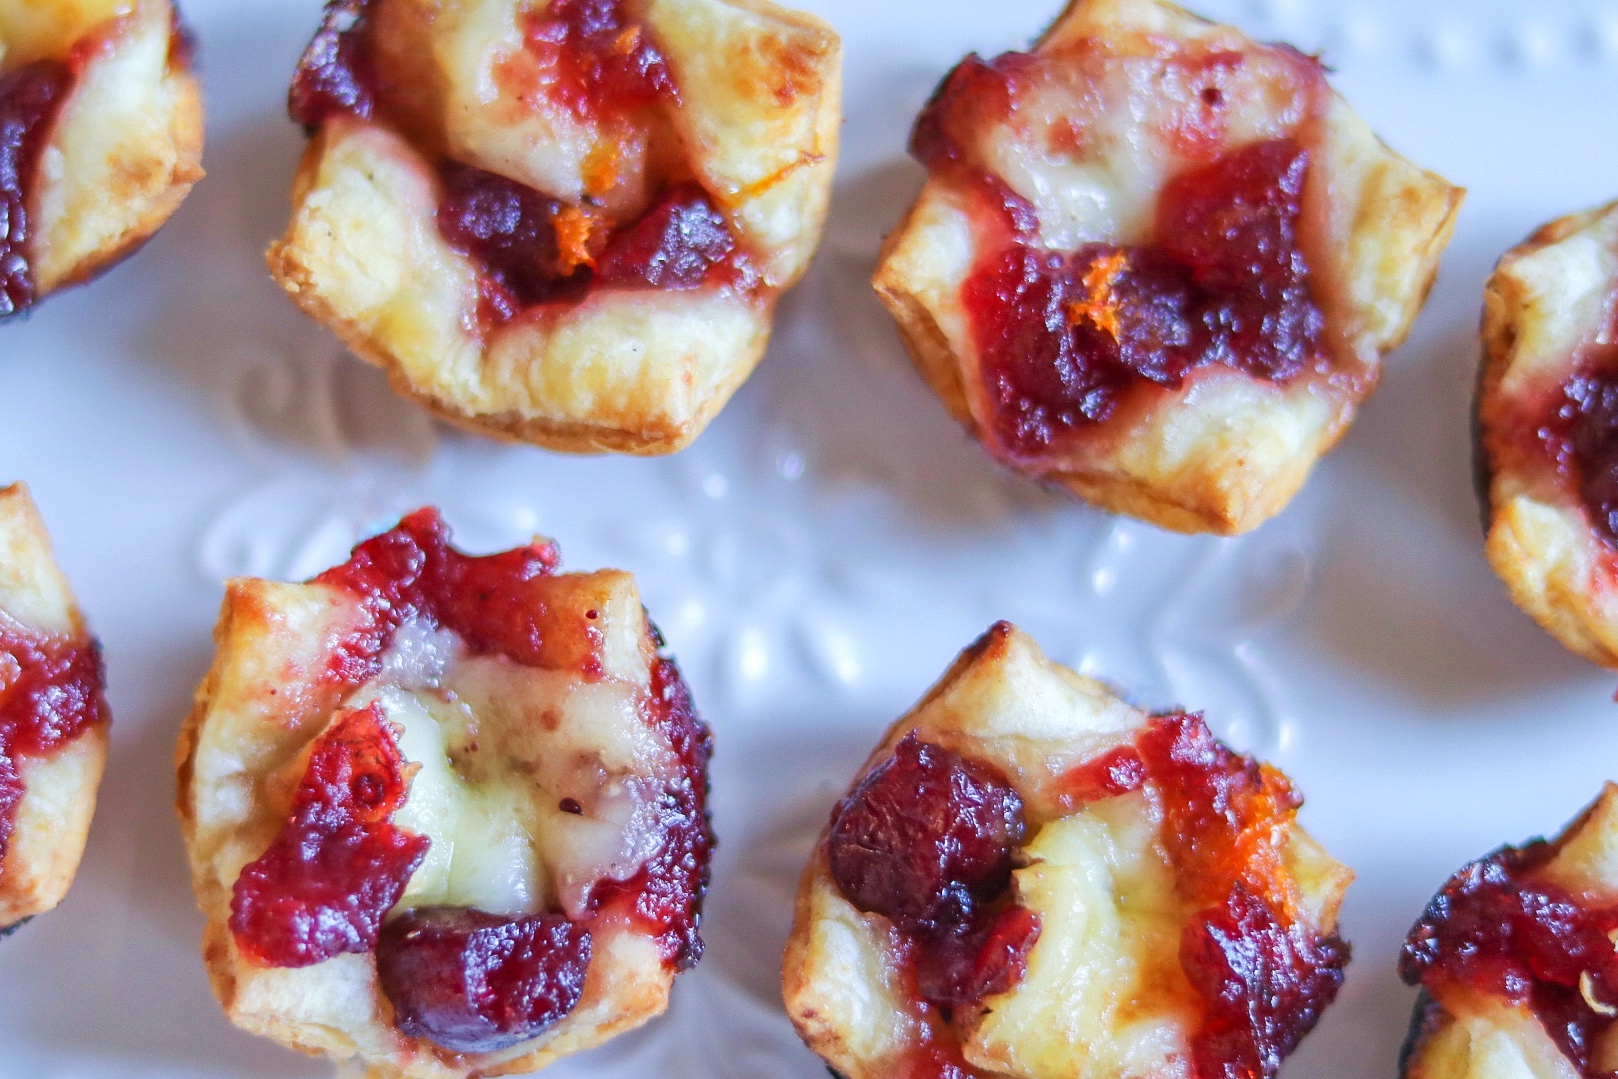 Cranberry-Brie Bites (cranberry, Brie, and puff pastry appetizers)